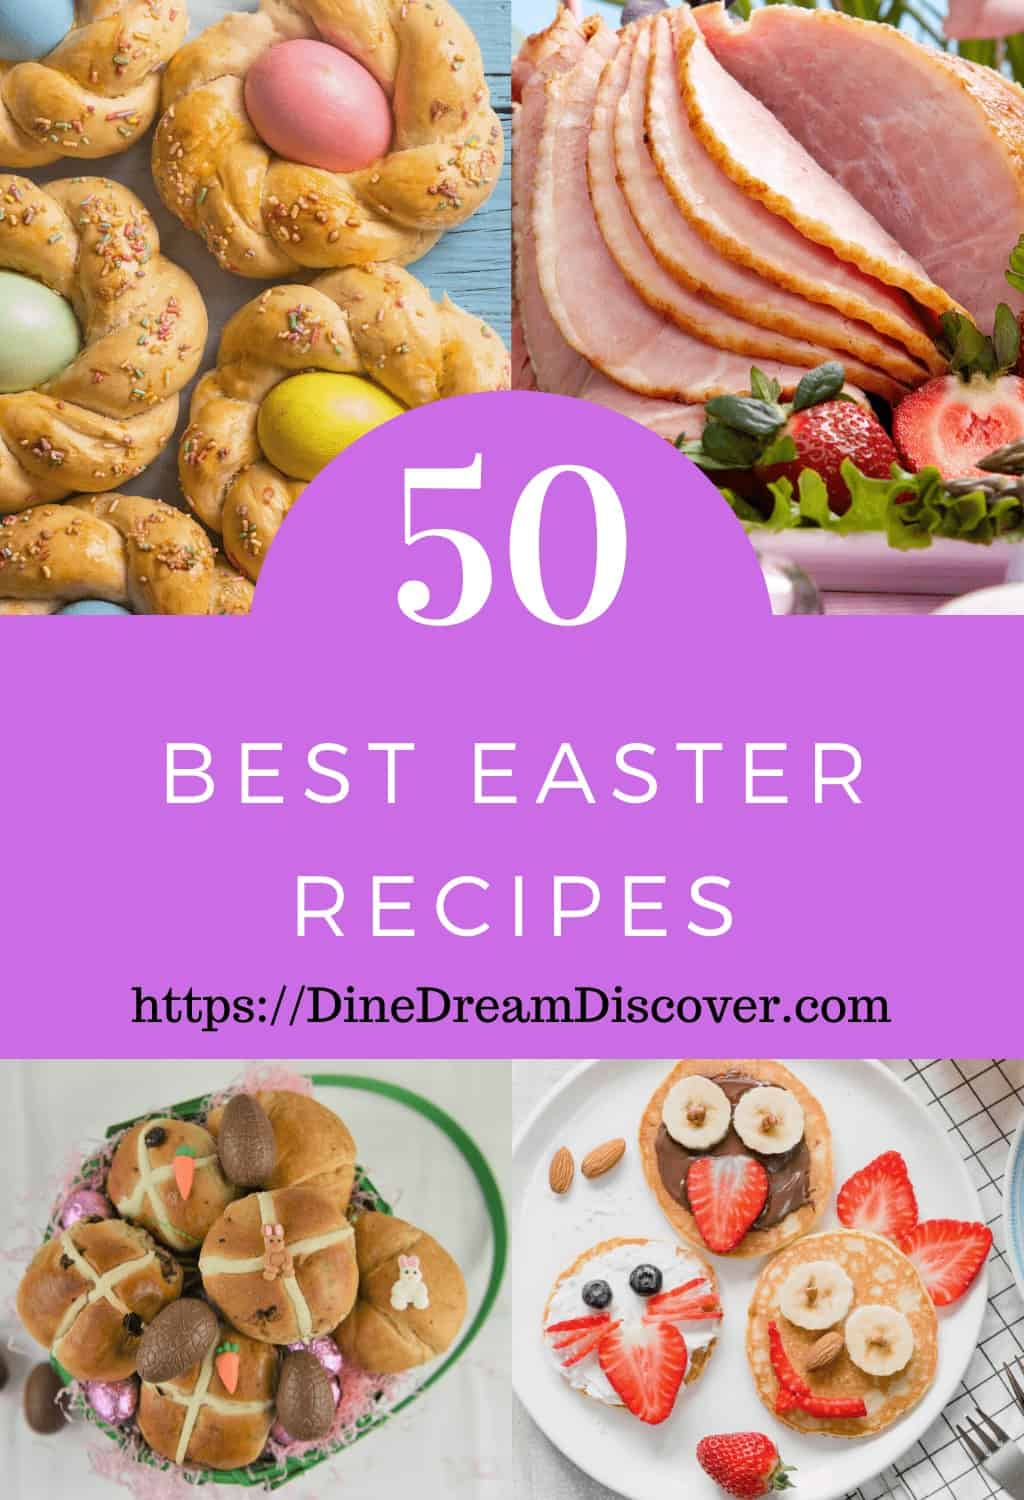 BEST EASTER RECIPES